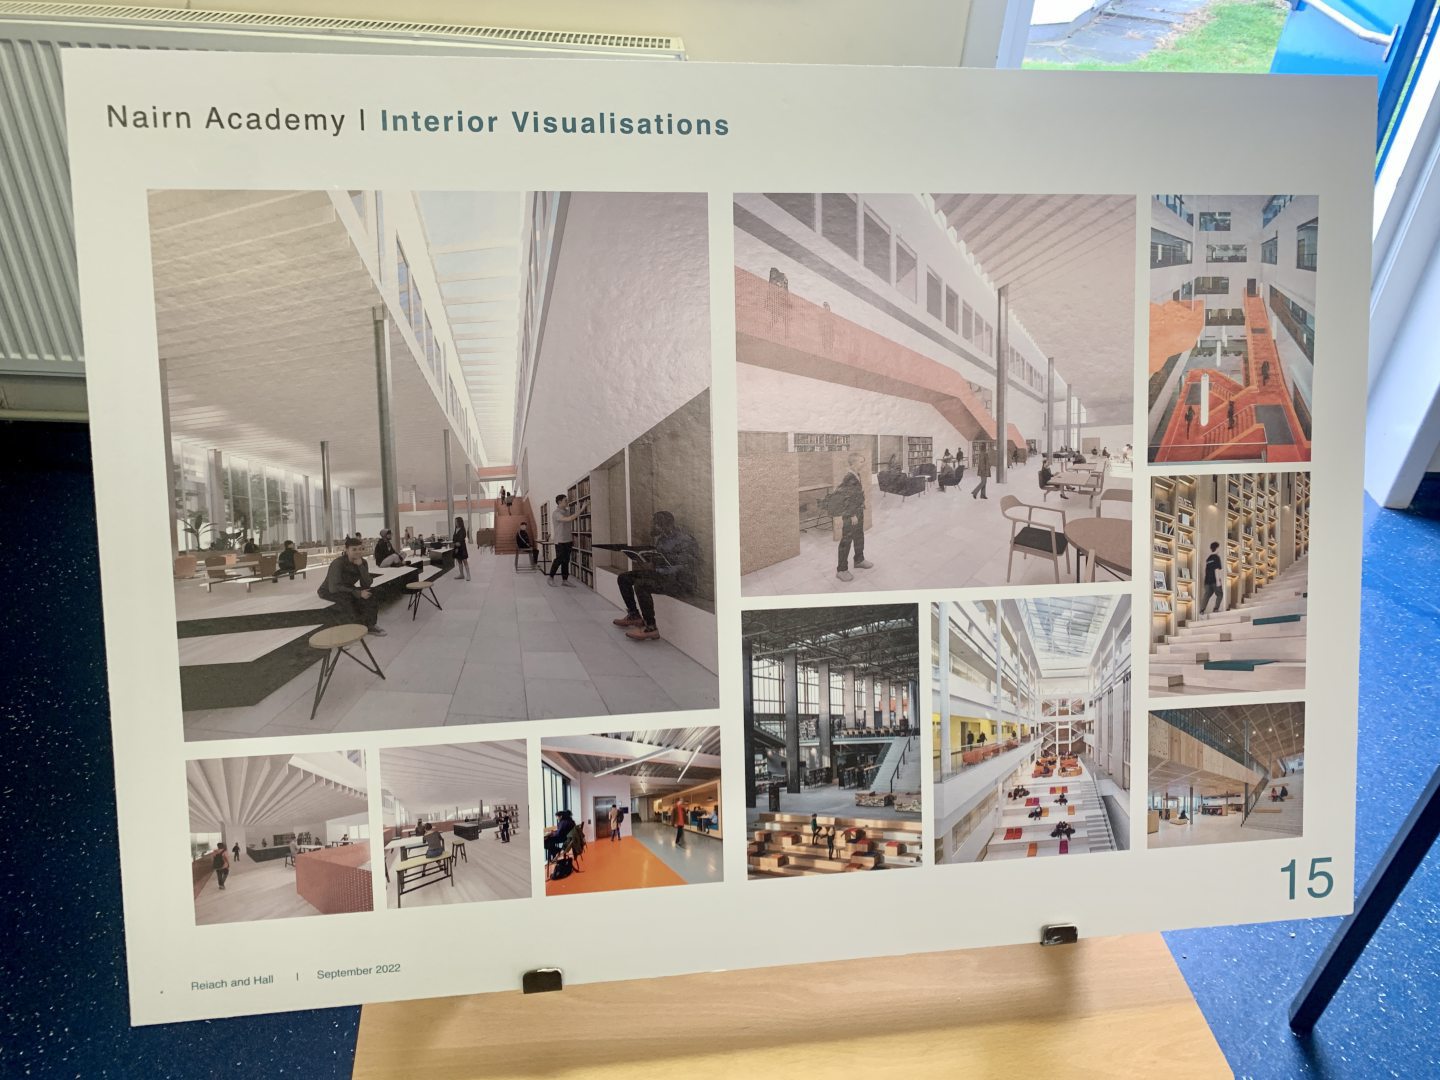 Early designs for the New Nairn Academy